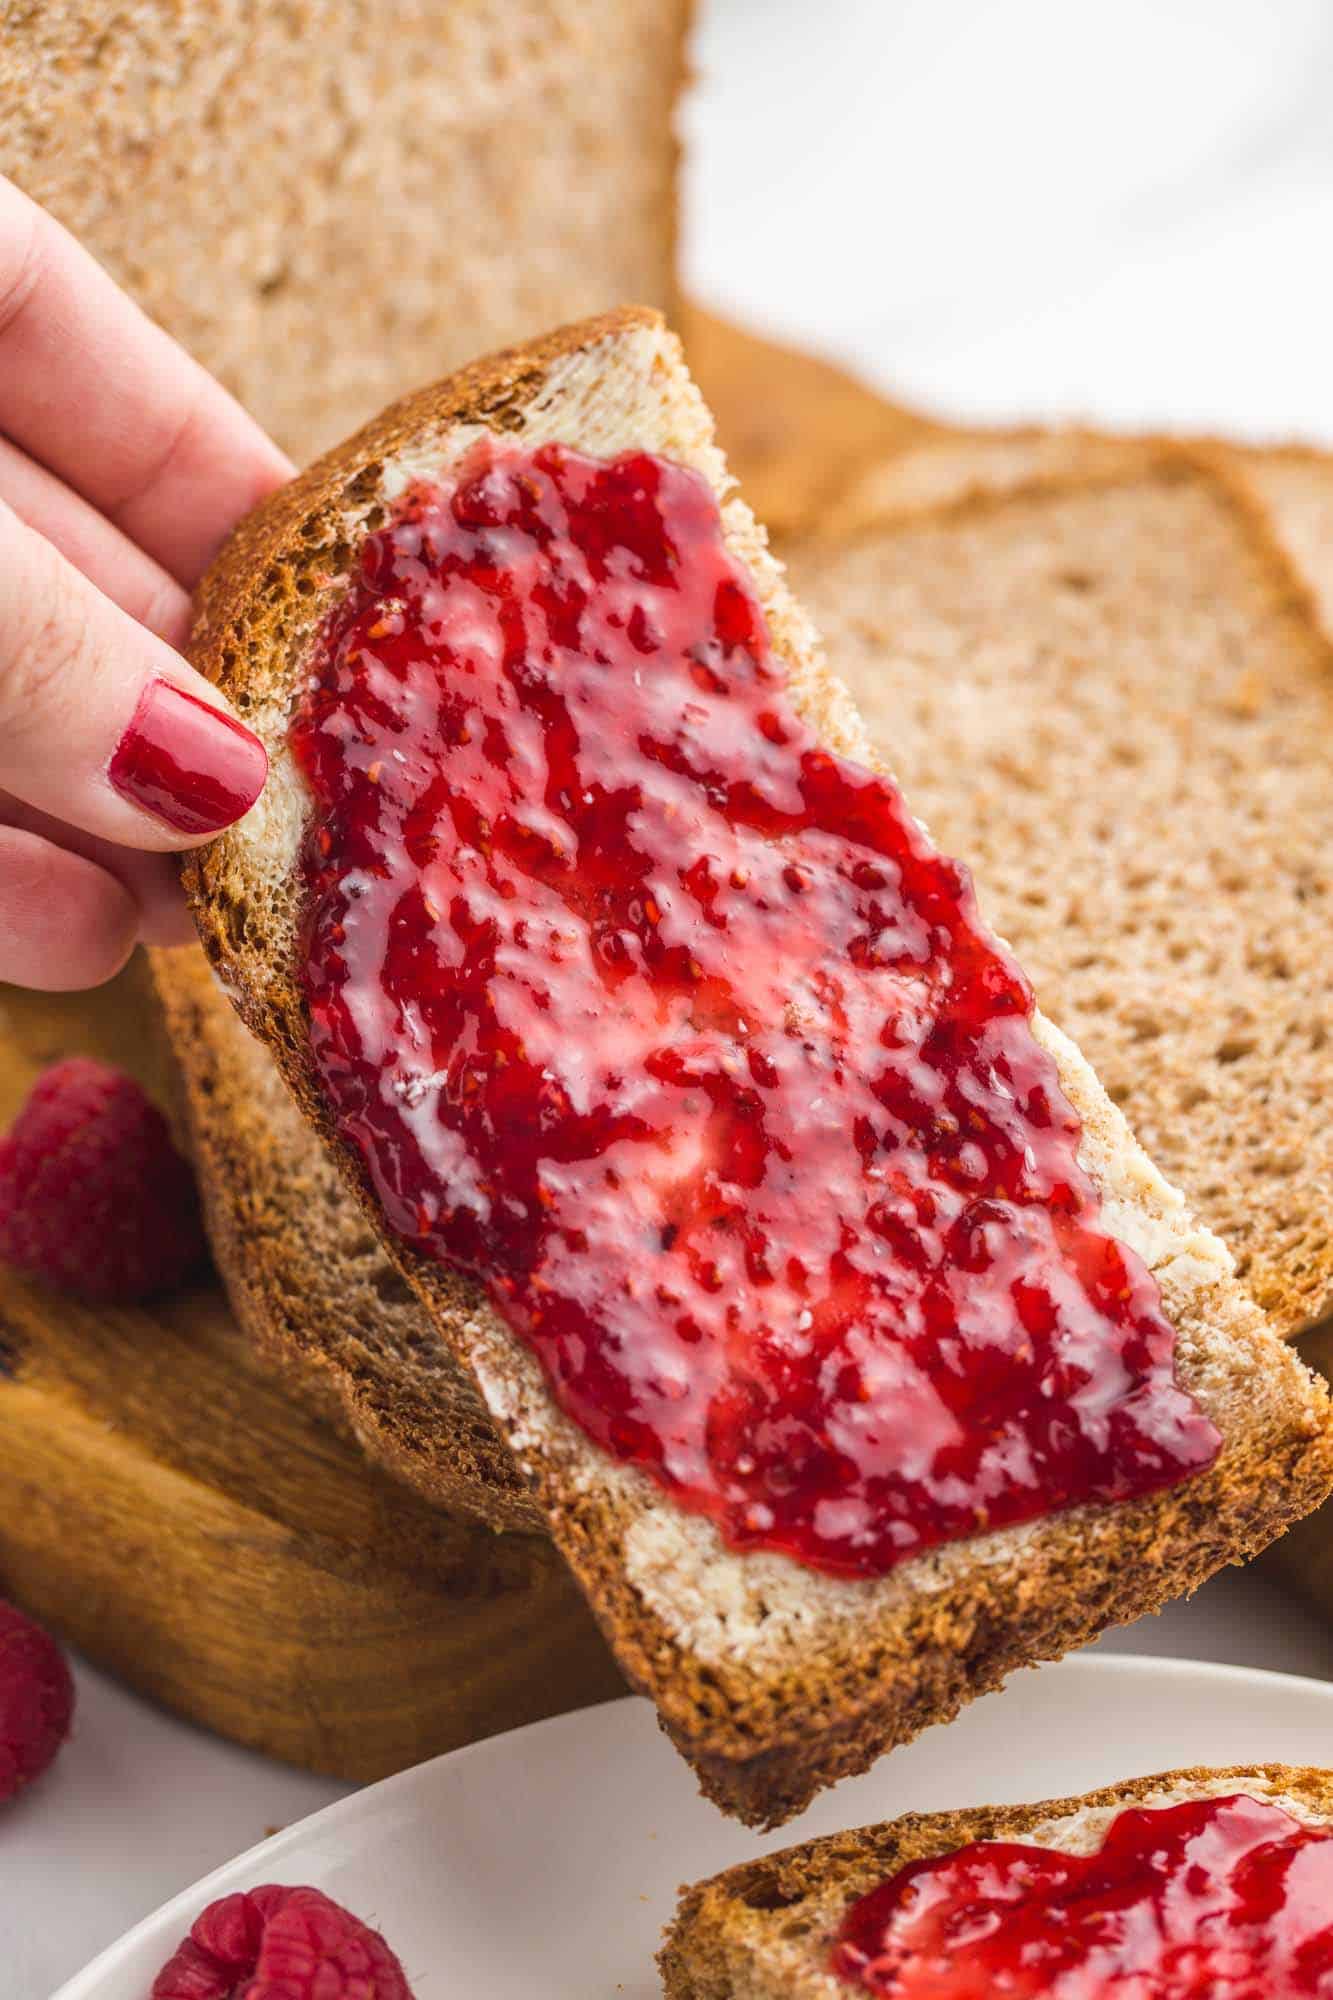 Holding a piece of whole wheat bread with raspberry jam on it